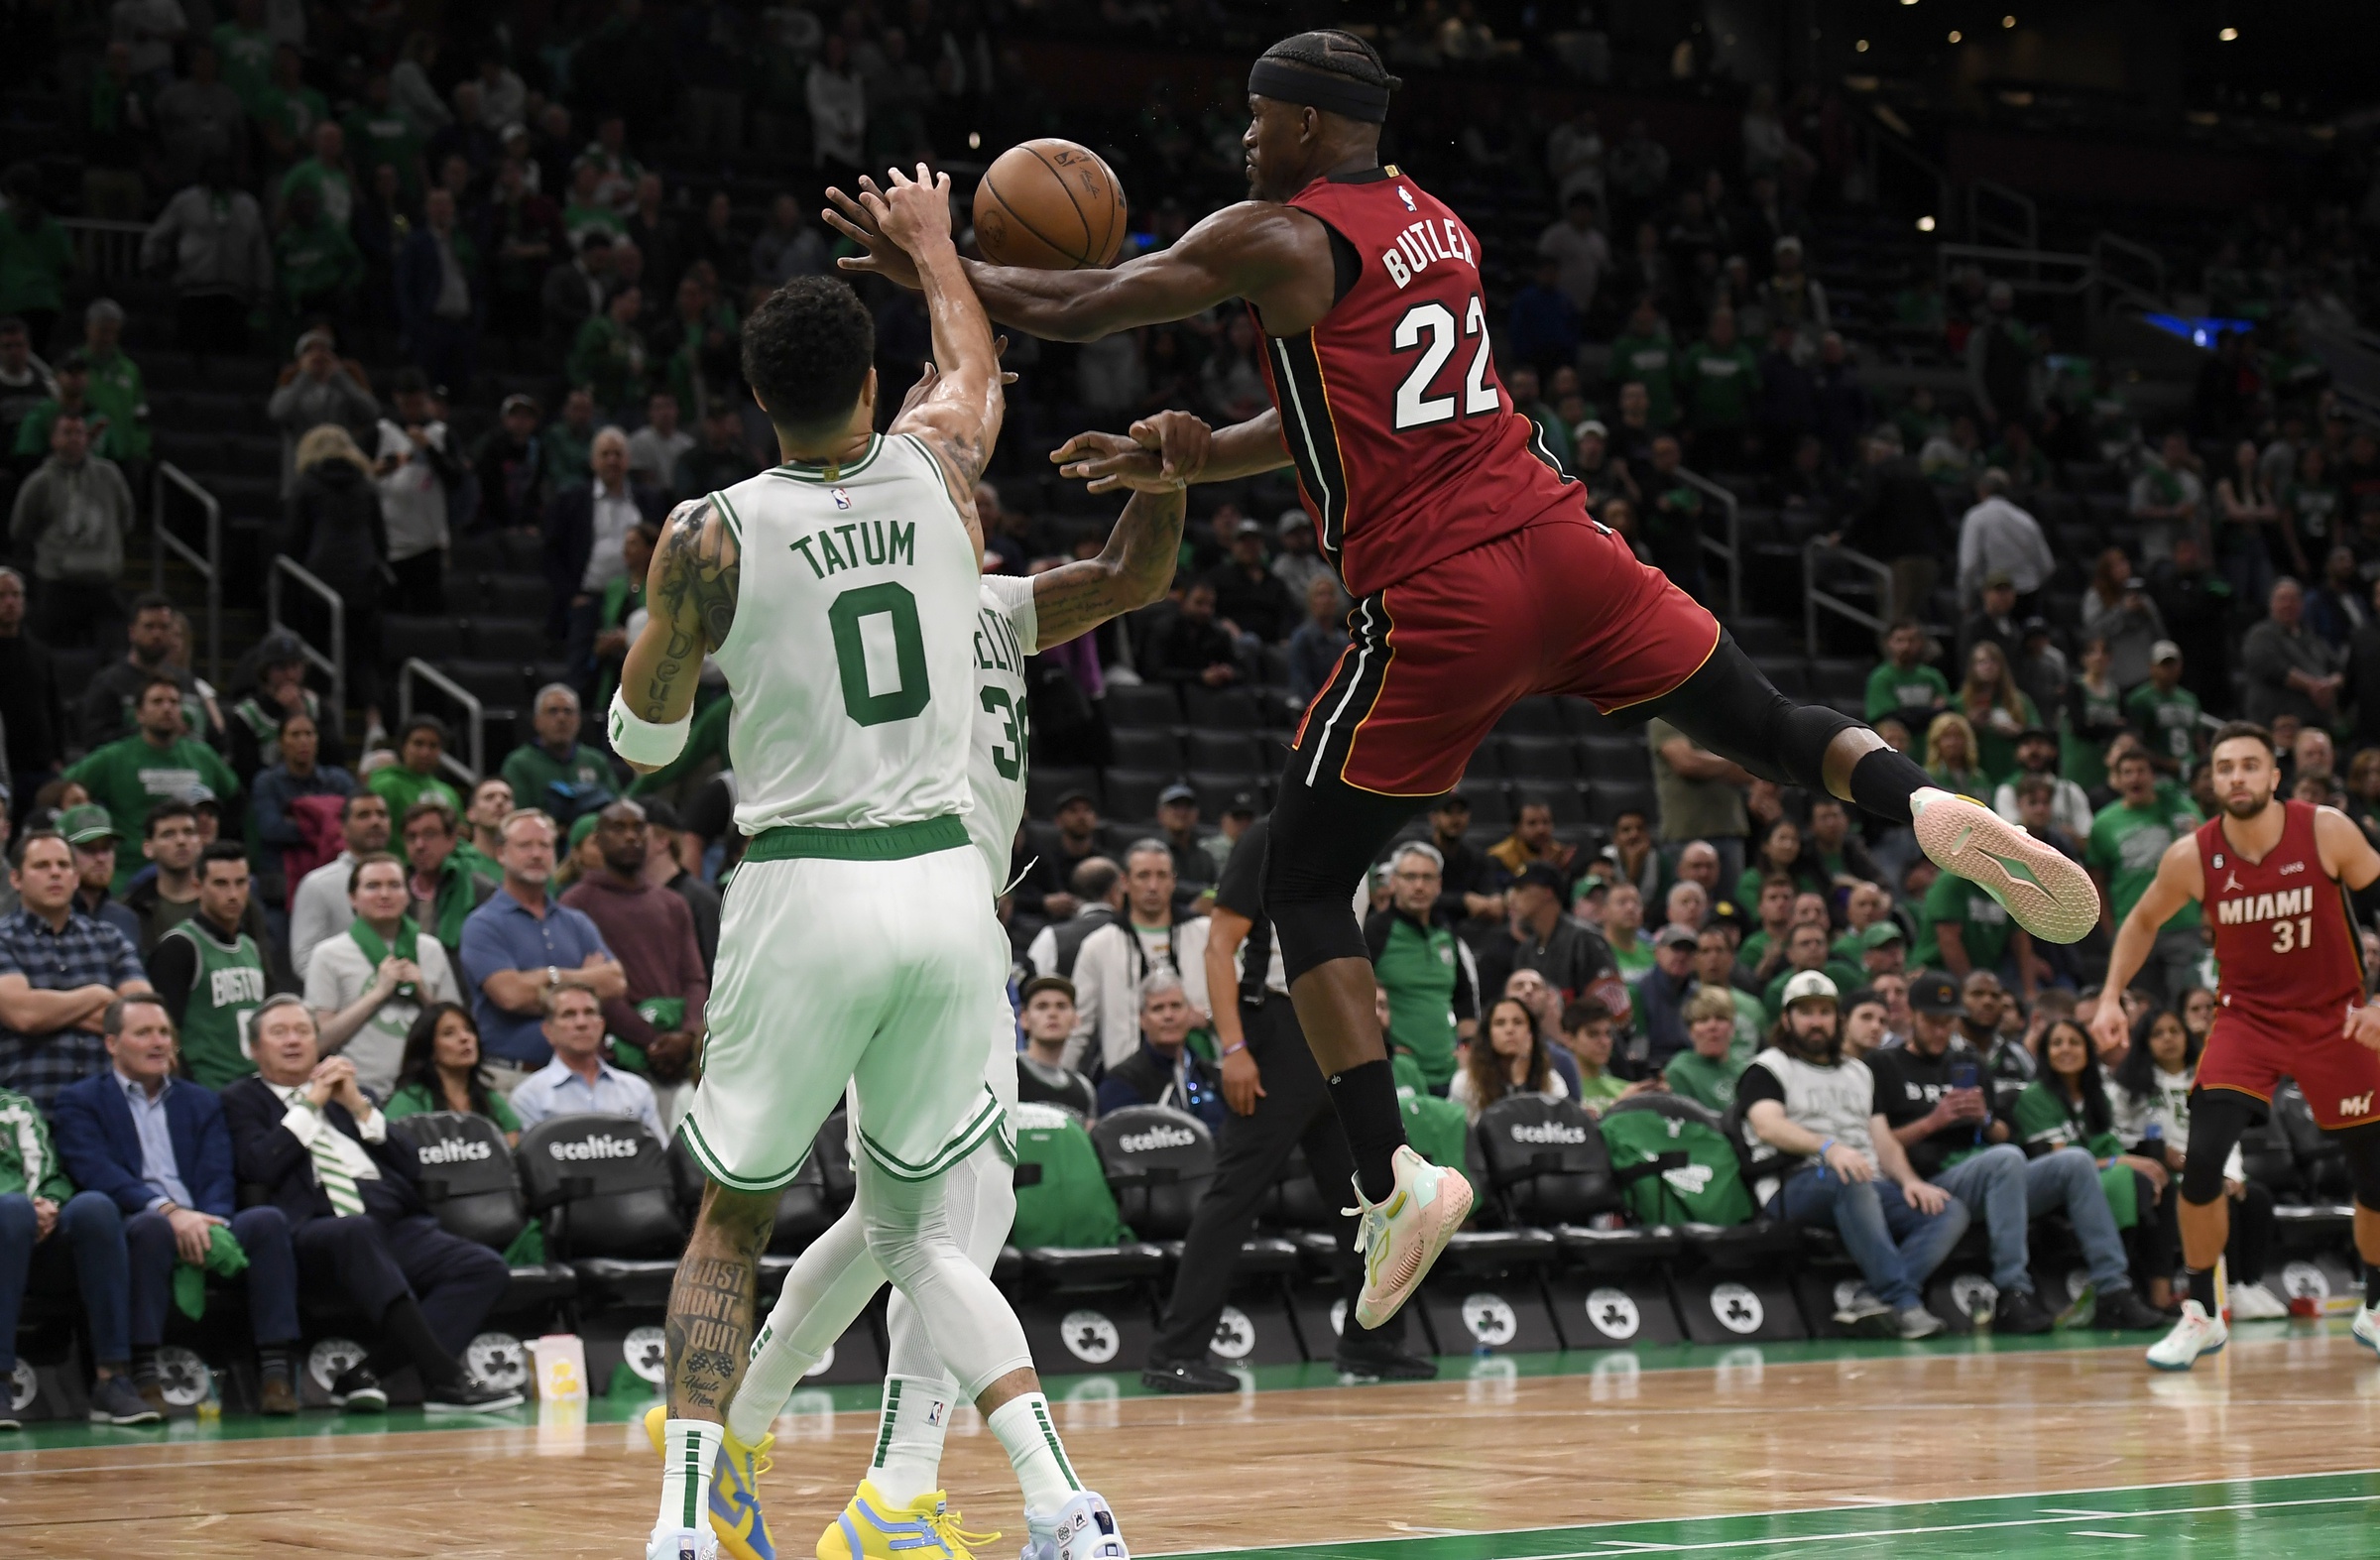 May 17, 2023; Boston, Massachusetts, USA; Miami Heat forward Jimmy Butler (22) and Boston Celtics forward Jayson Tatum (0) fight for a loose ball during the second half in game one of the Eastern Conference Finals for the 2023 NBA playoffs at TD Garden. Mandatory Credit: Bob DeChiara-USA TODAY Sports